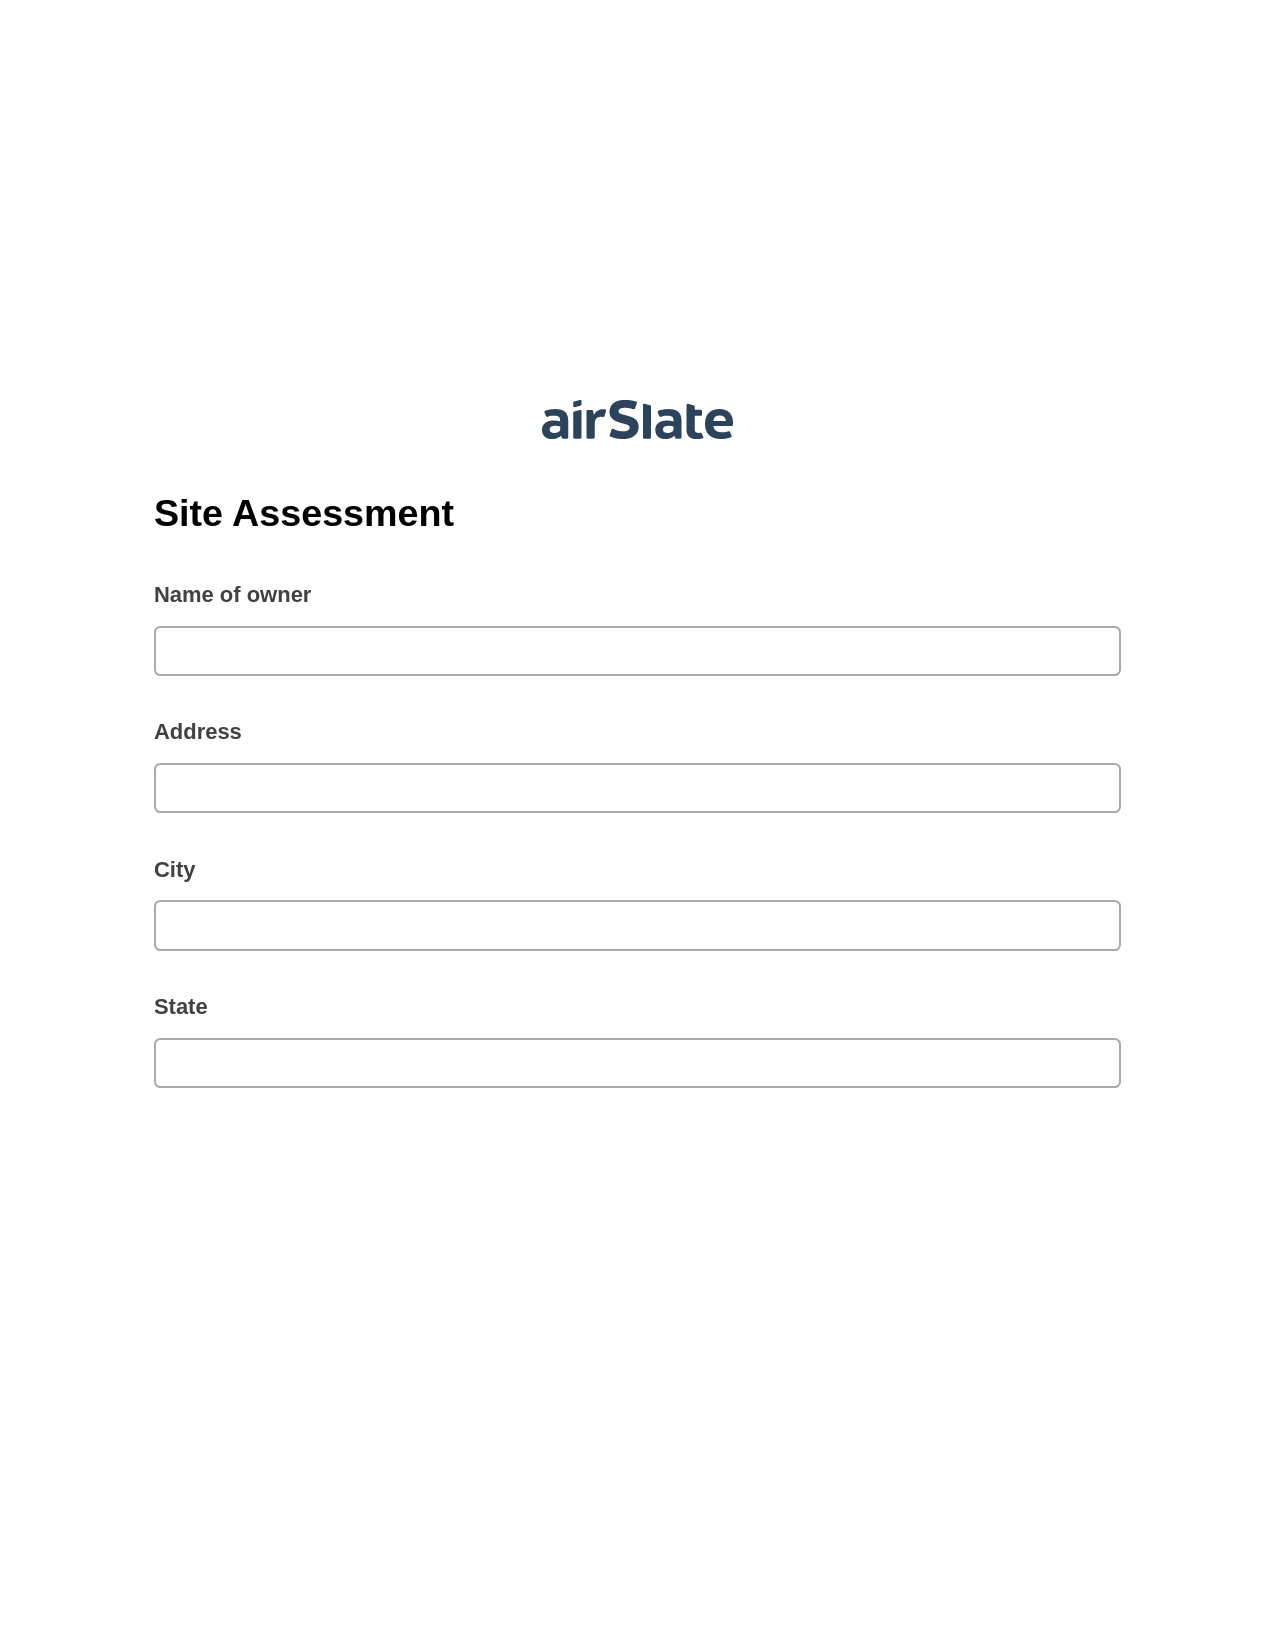 Site Assessment Pre-fill from Excel Spreadsheet Bot, Mailchimp send Campaign bot, Export to Excel 365 Bot